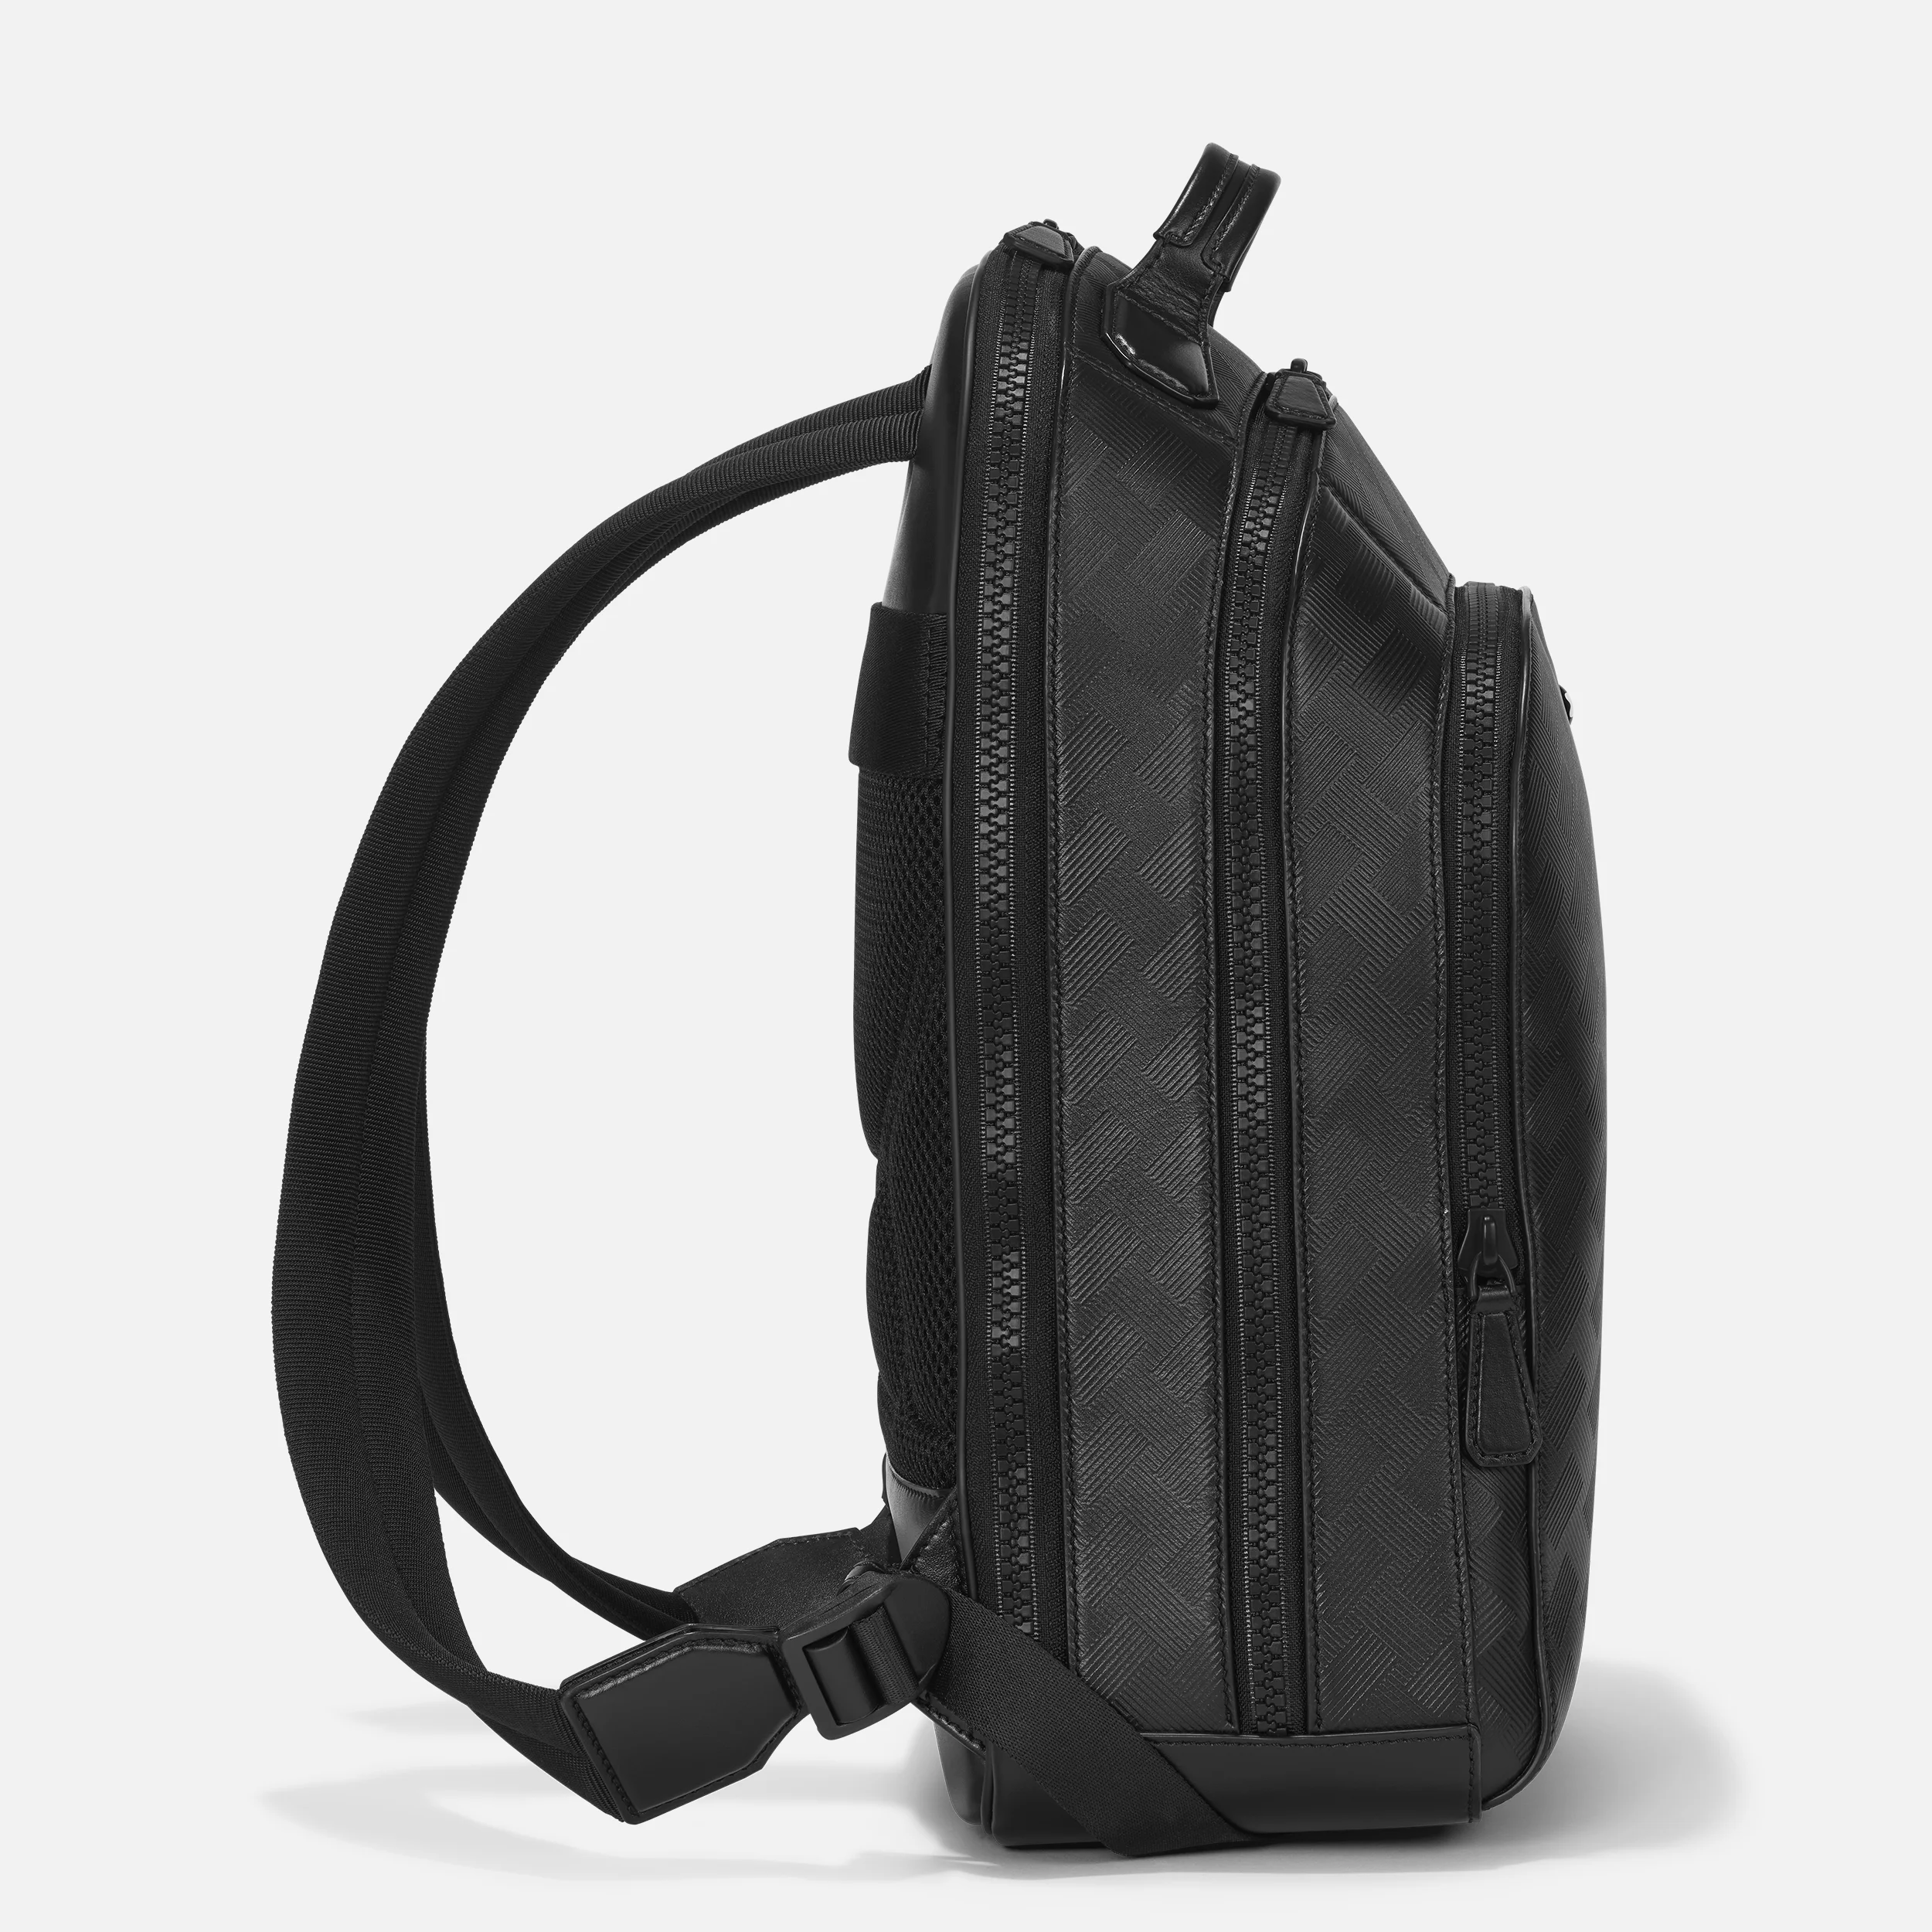 Montblanc Extreme 3.0 Backpack 3 Compartments Medium Black - Pencraft the boutique